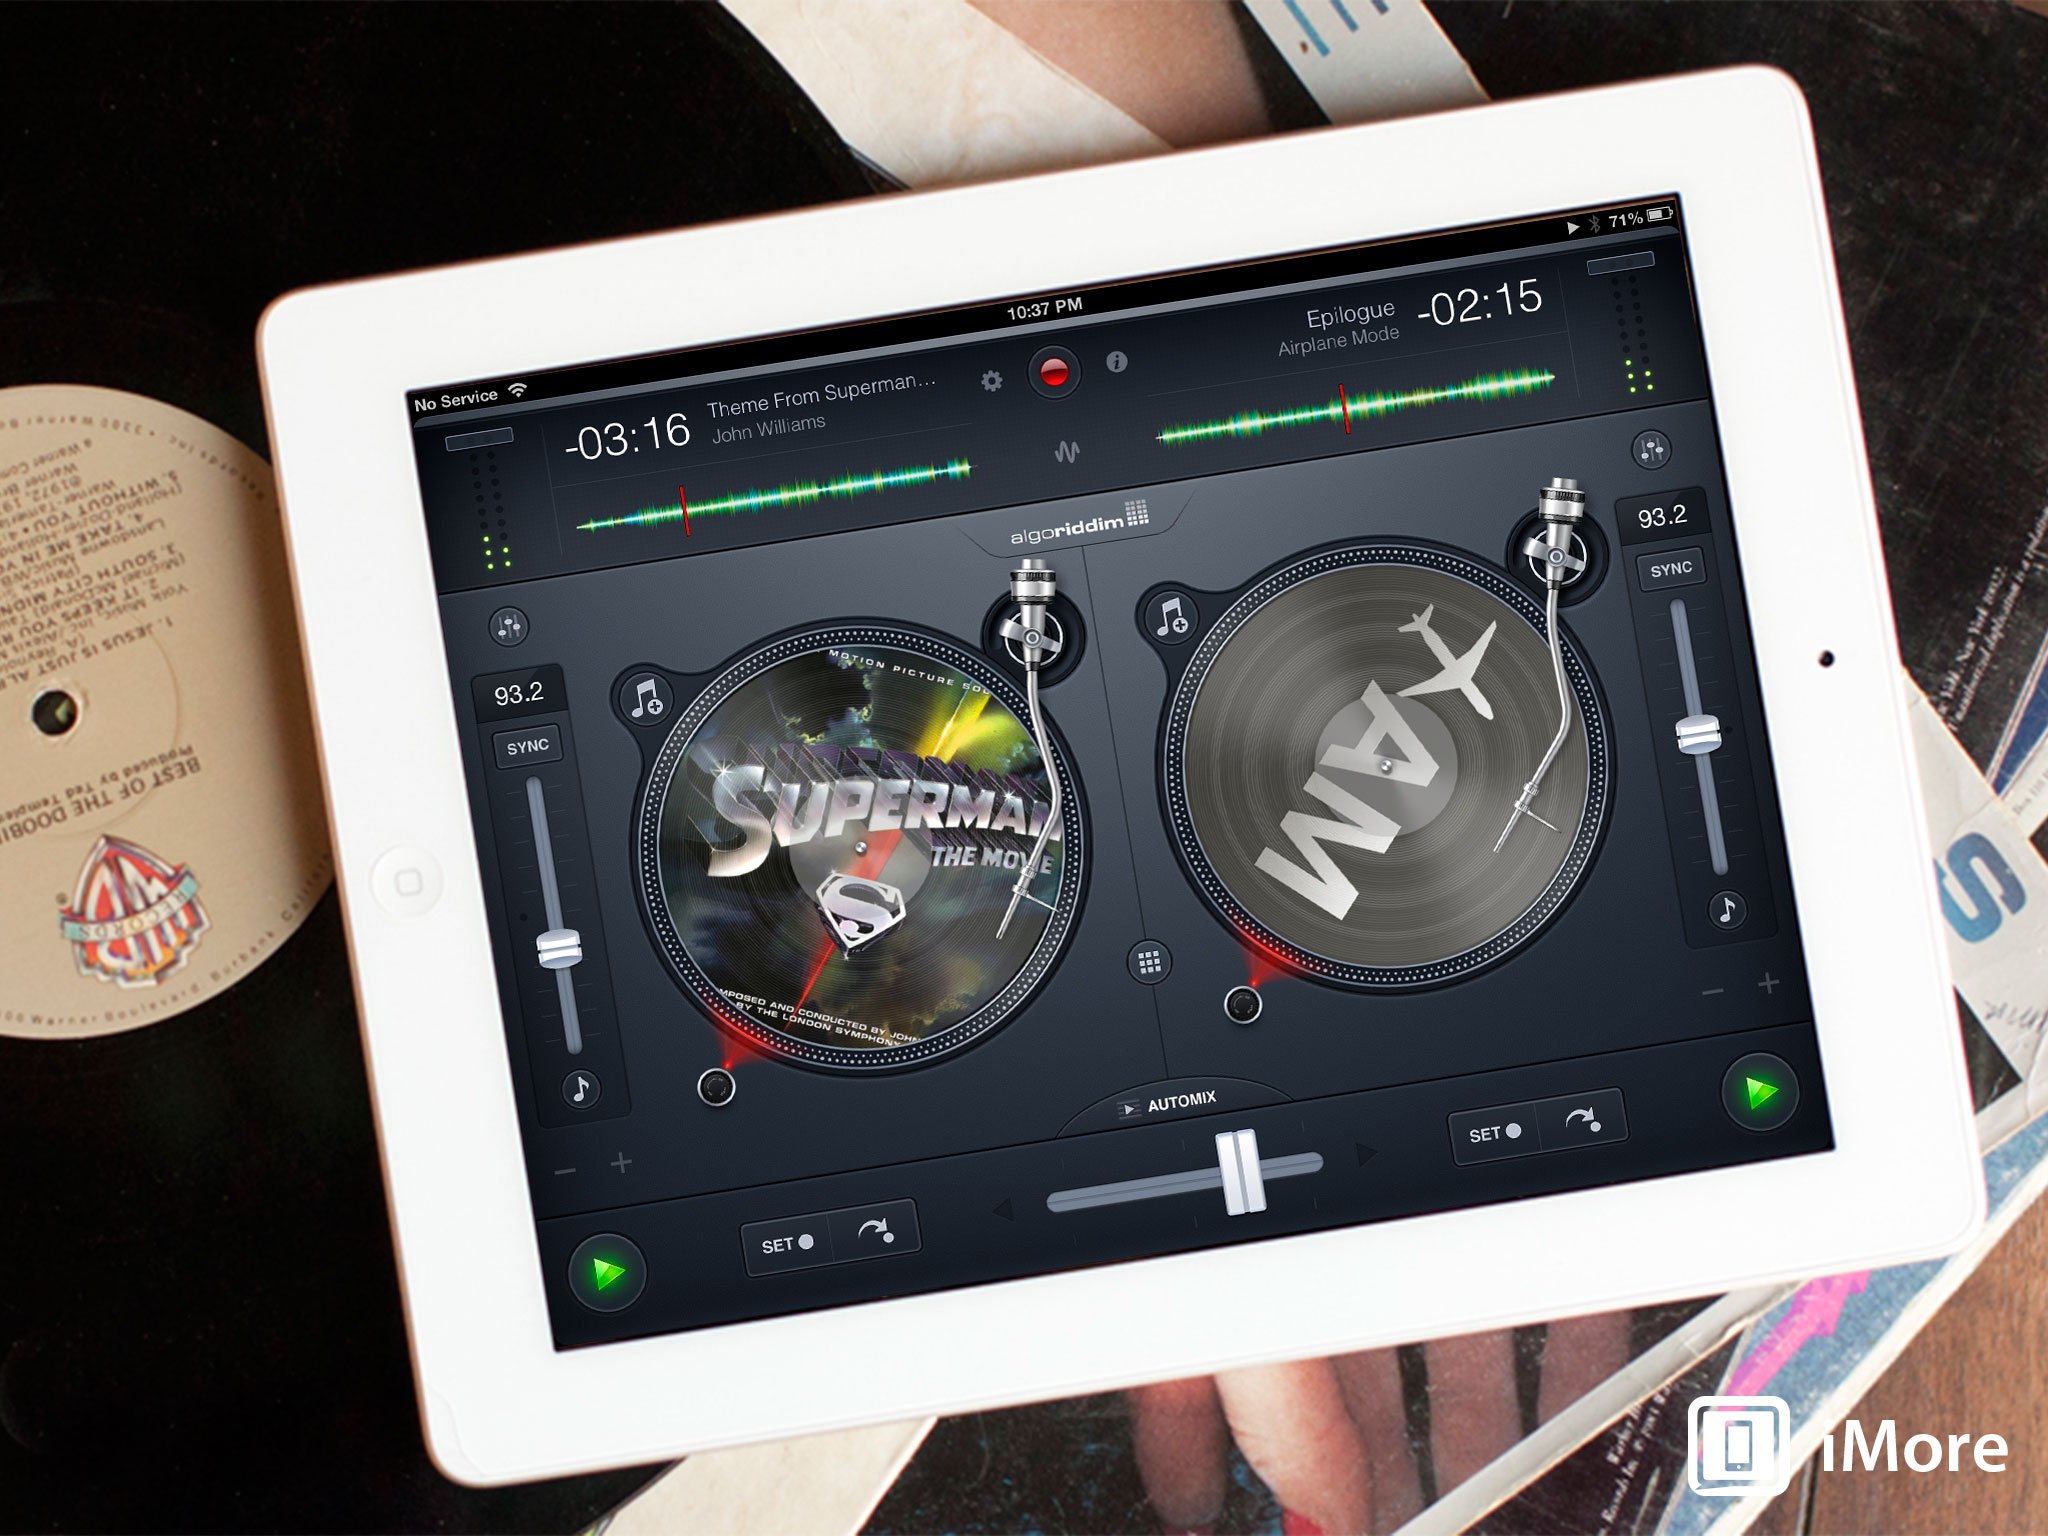 djay 2 brings even better, more visual music mixing to iPad... and iPhone!